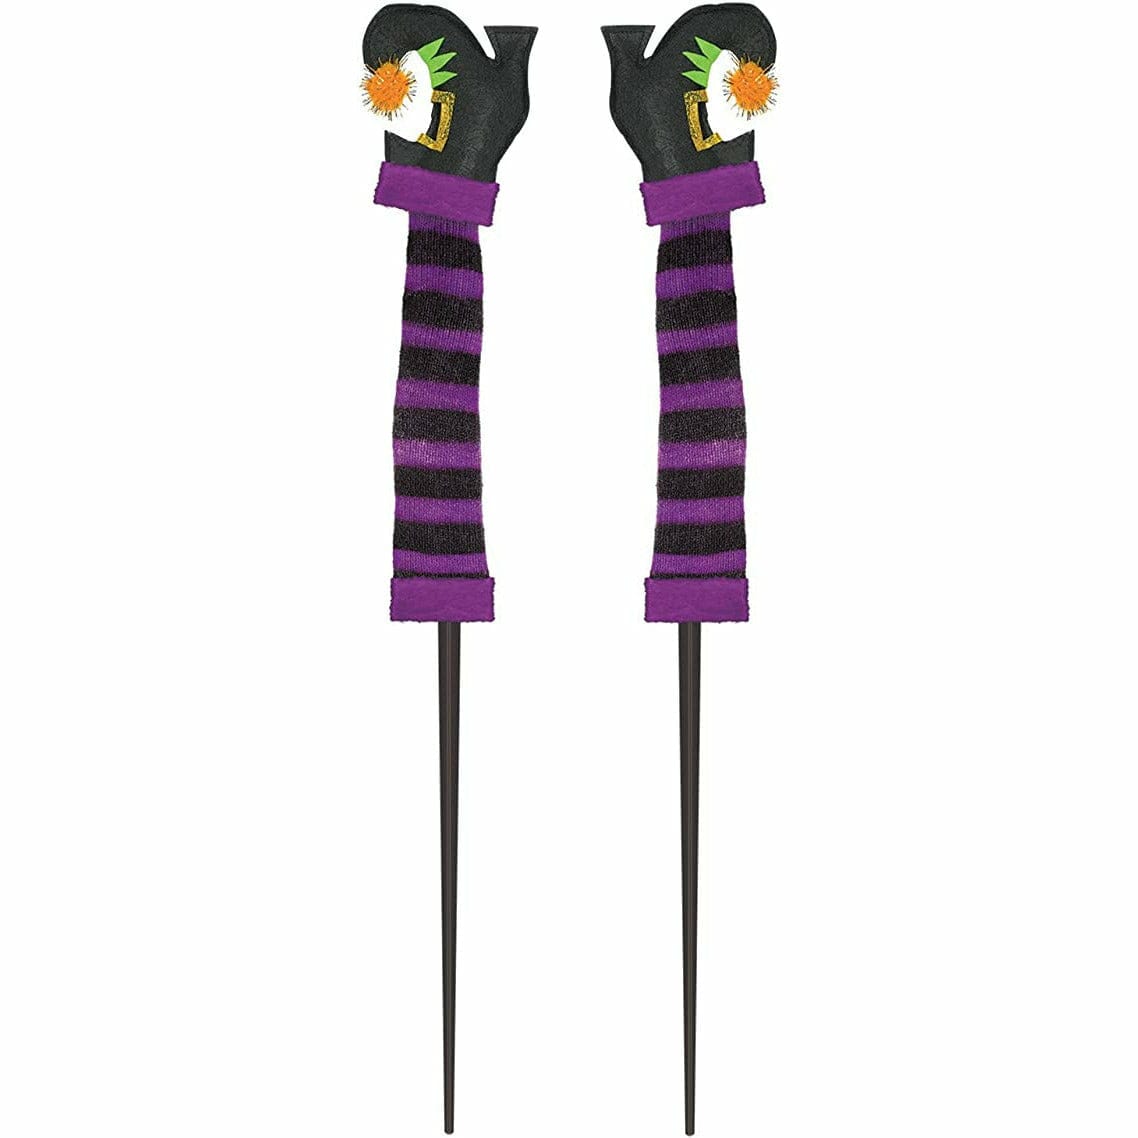 Ultimate Party Super Stores witch legs yard stake